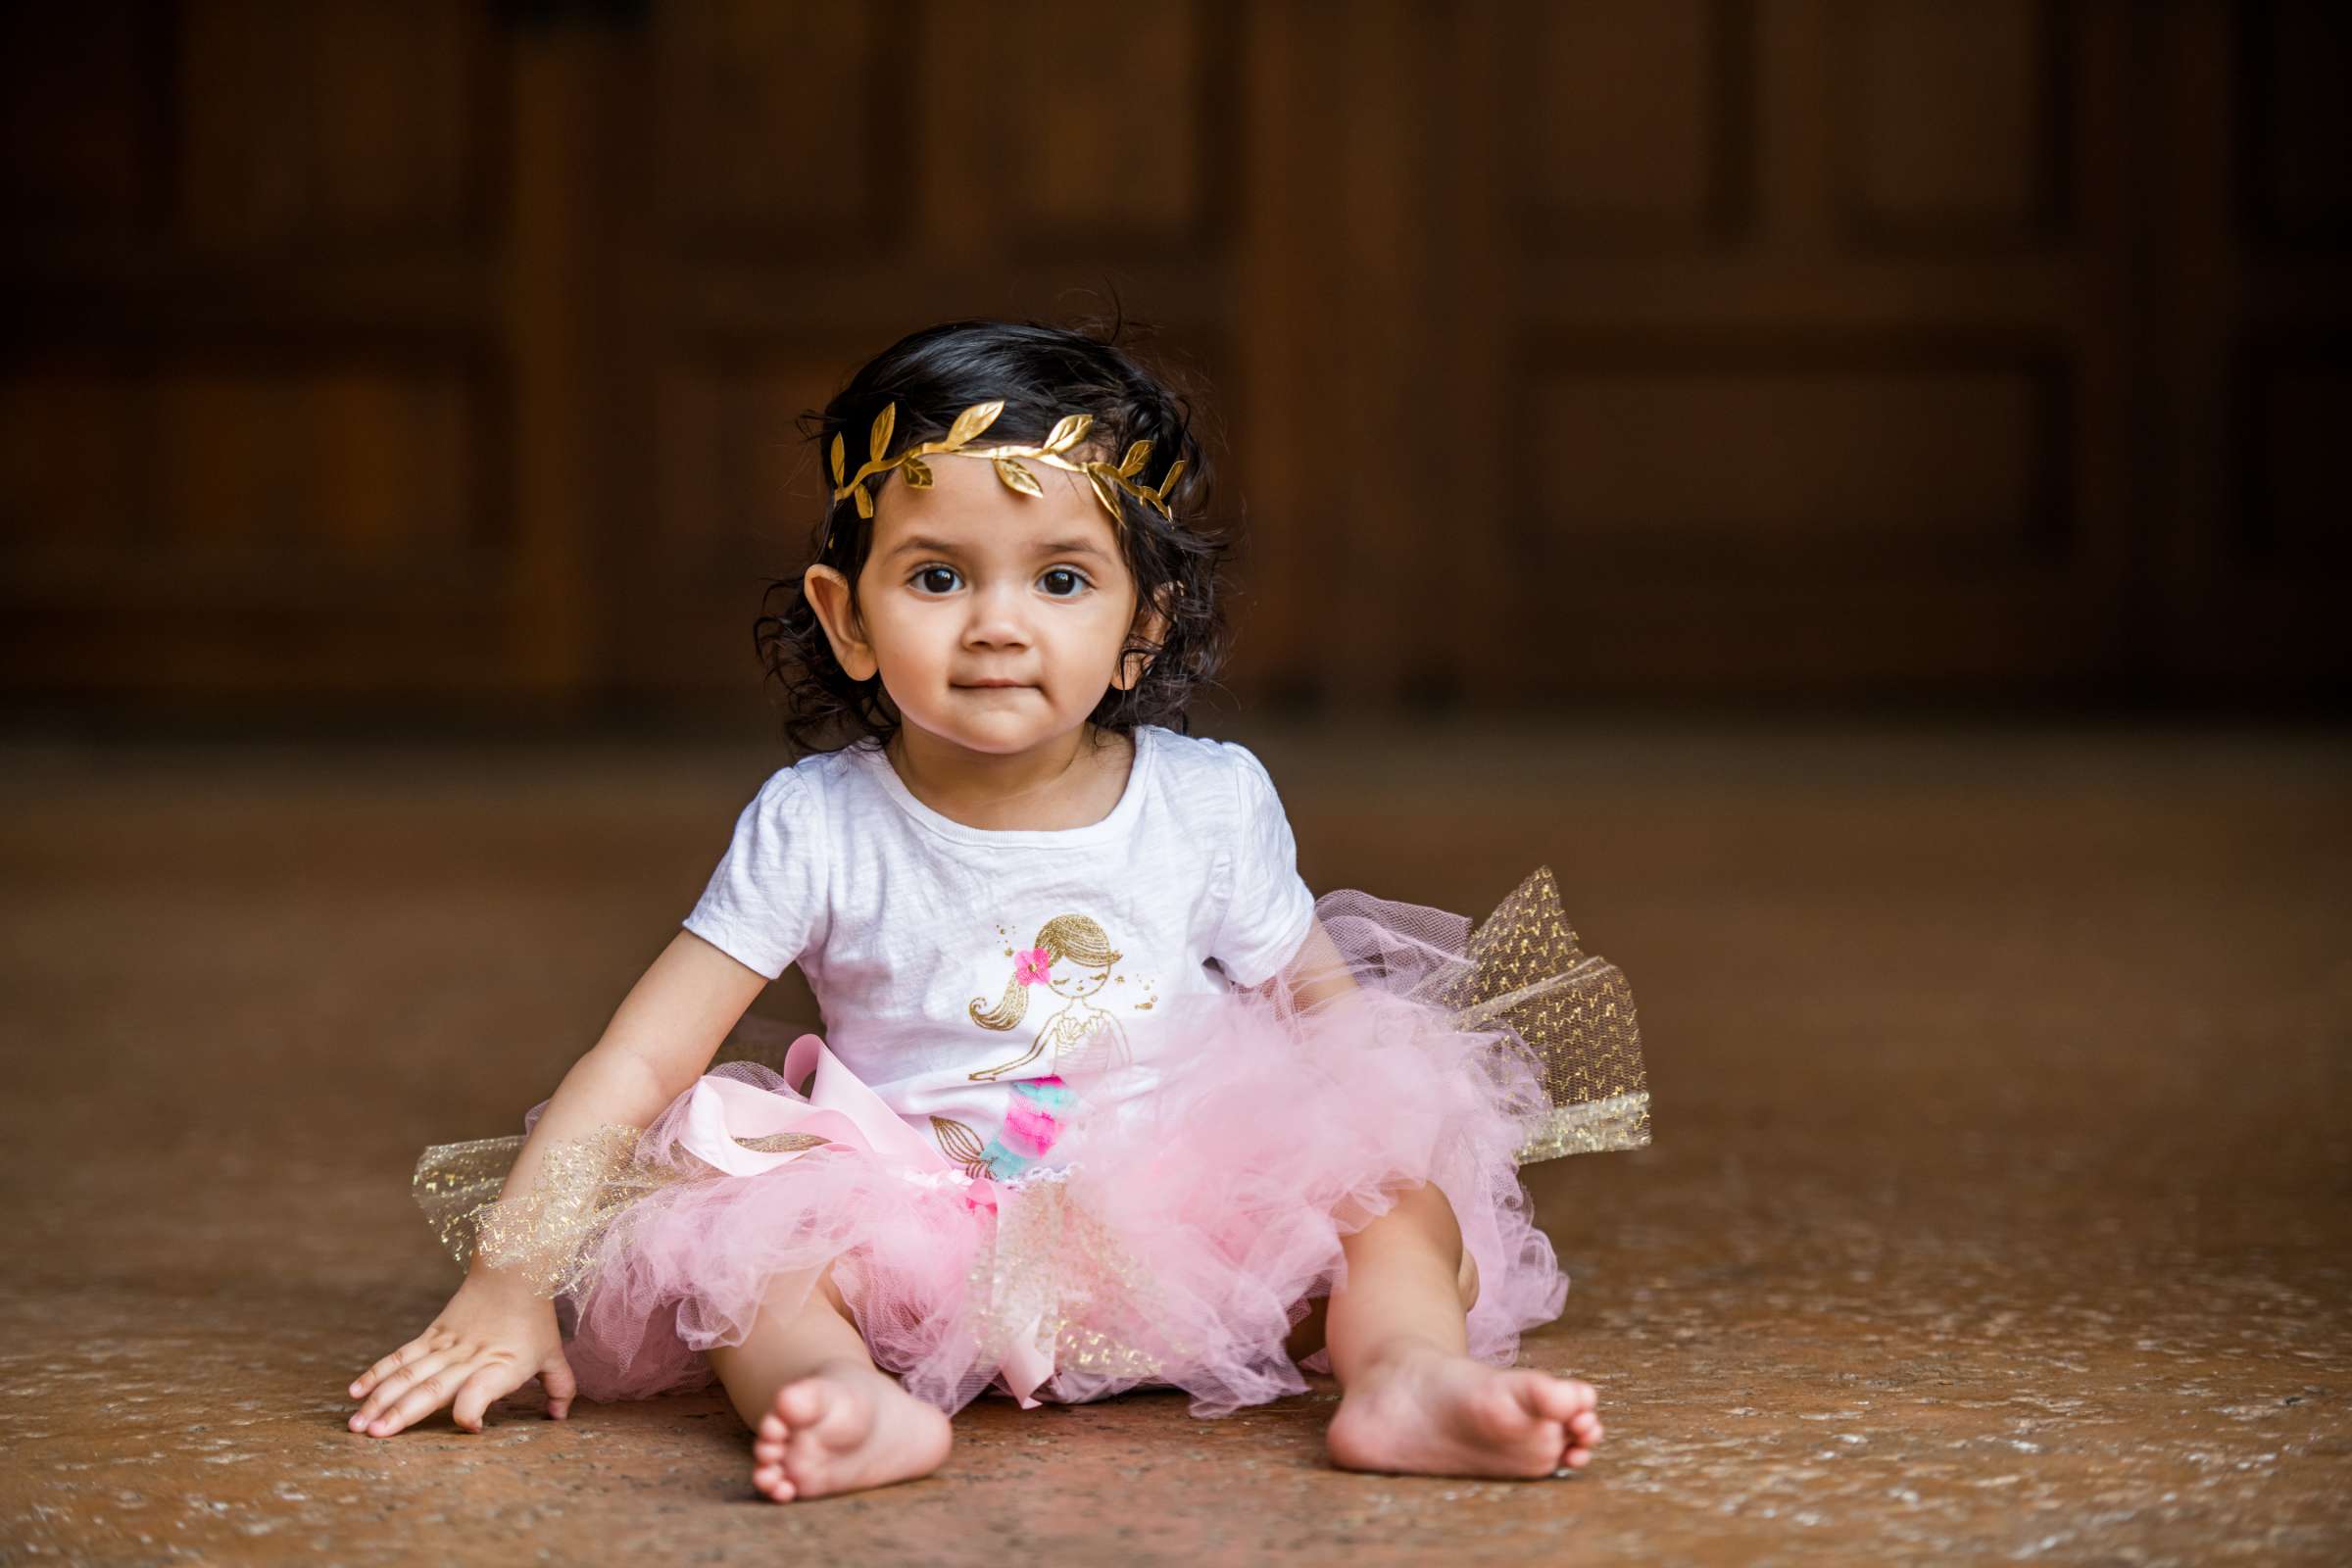 Toddler Photo Session, Sudeep Toddler Photo #1 by True Photography